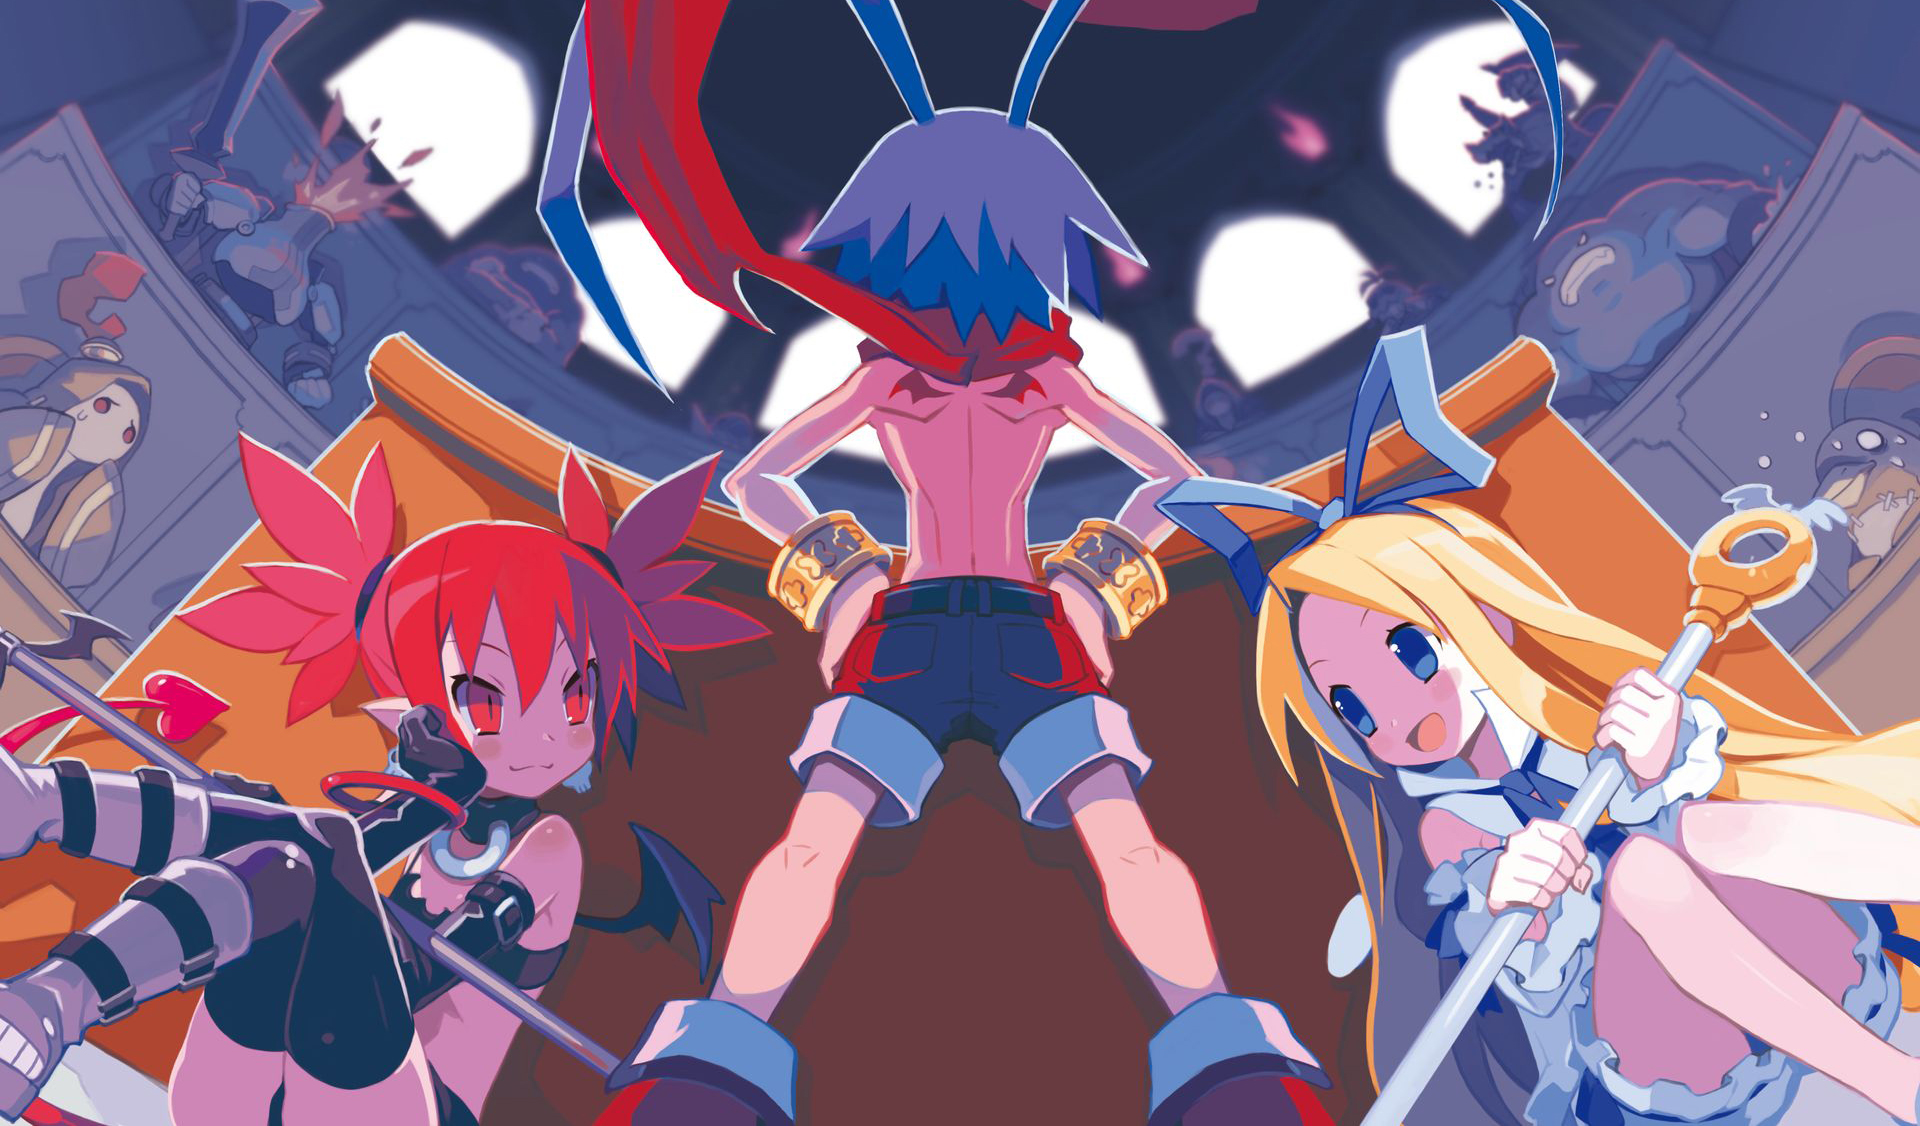 First Trailer for Disgaea 1 Complete